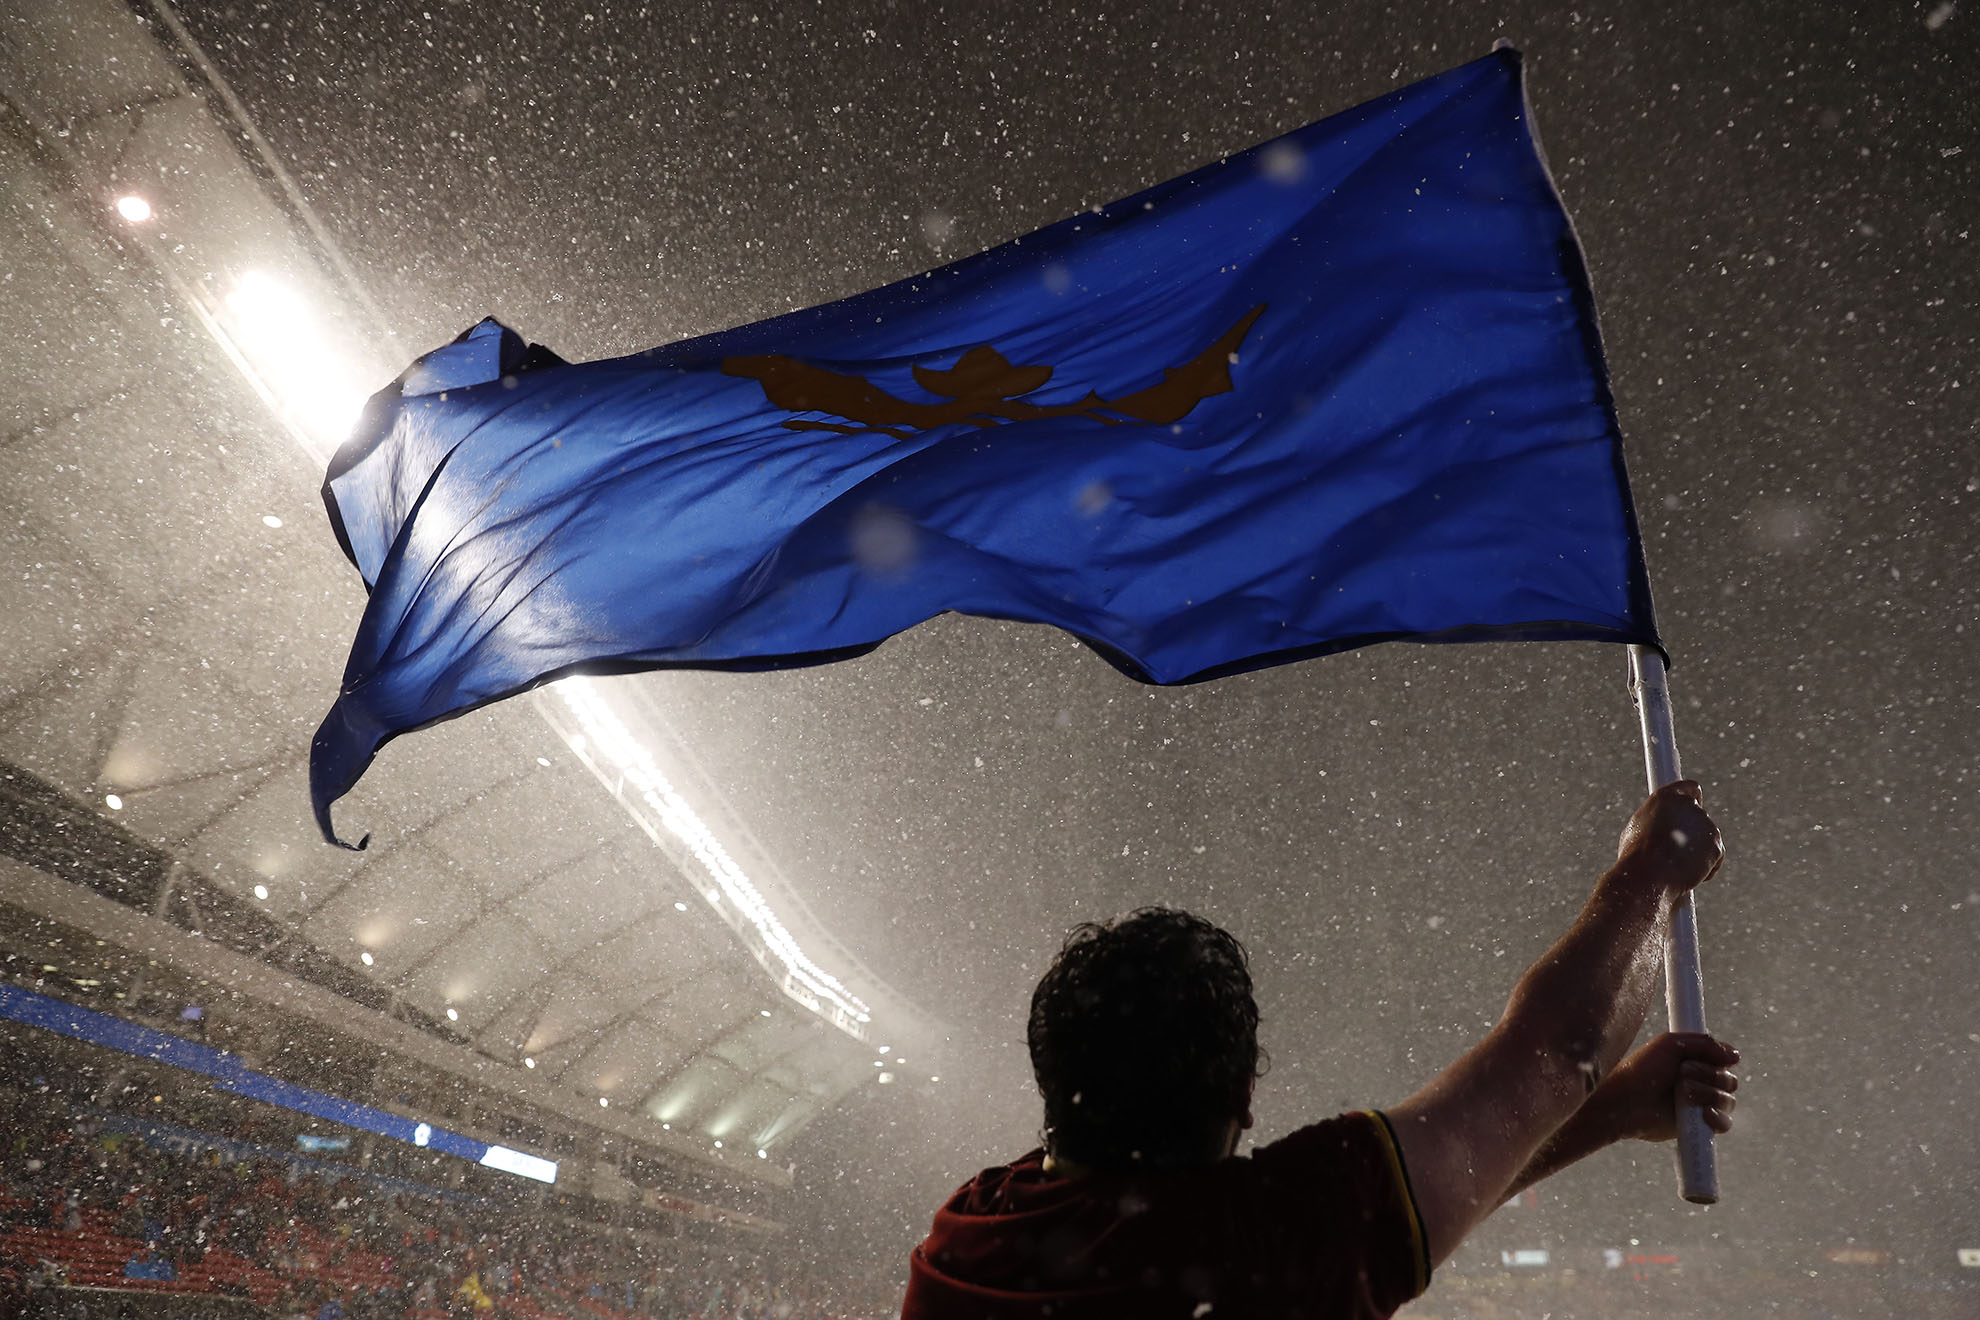 Soccer action shot - player waving a large blue flag as it snows in the stadium